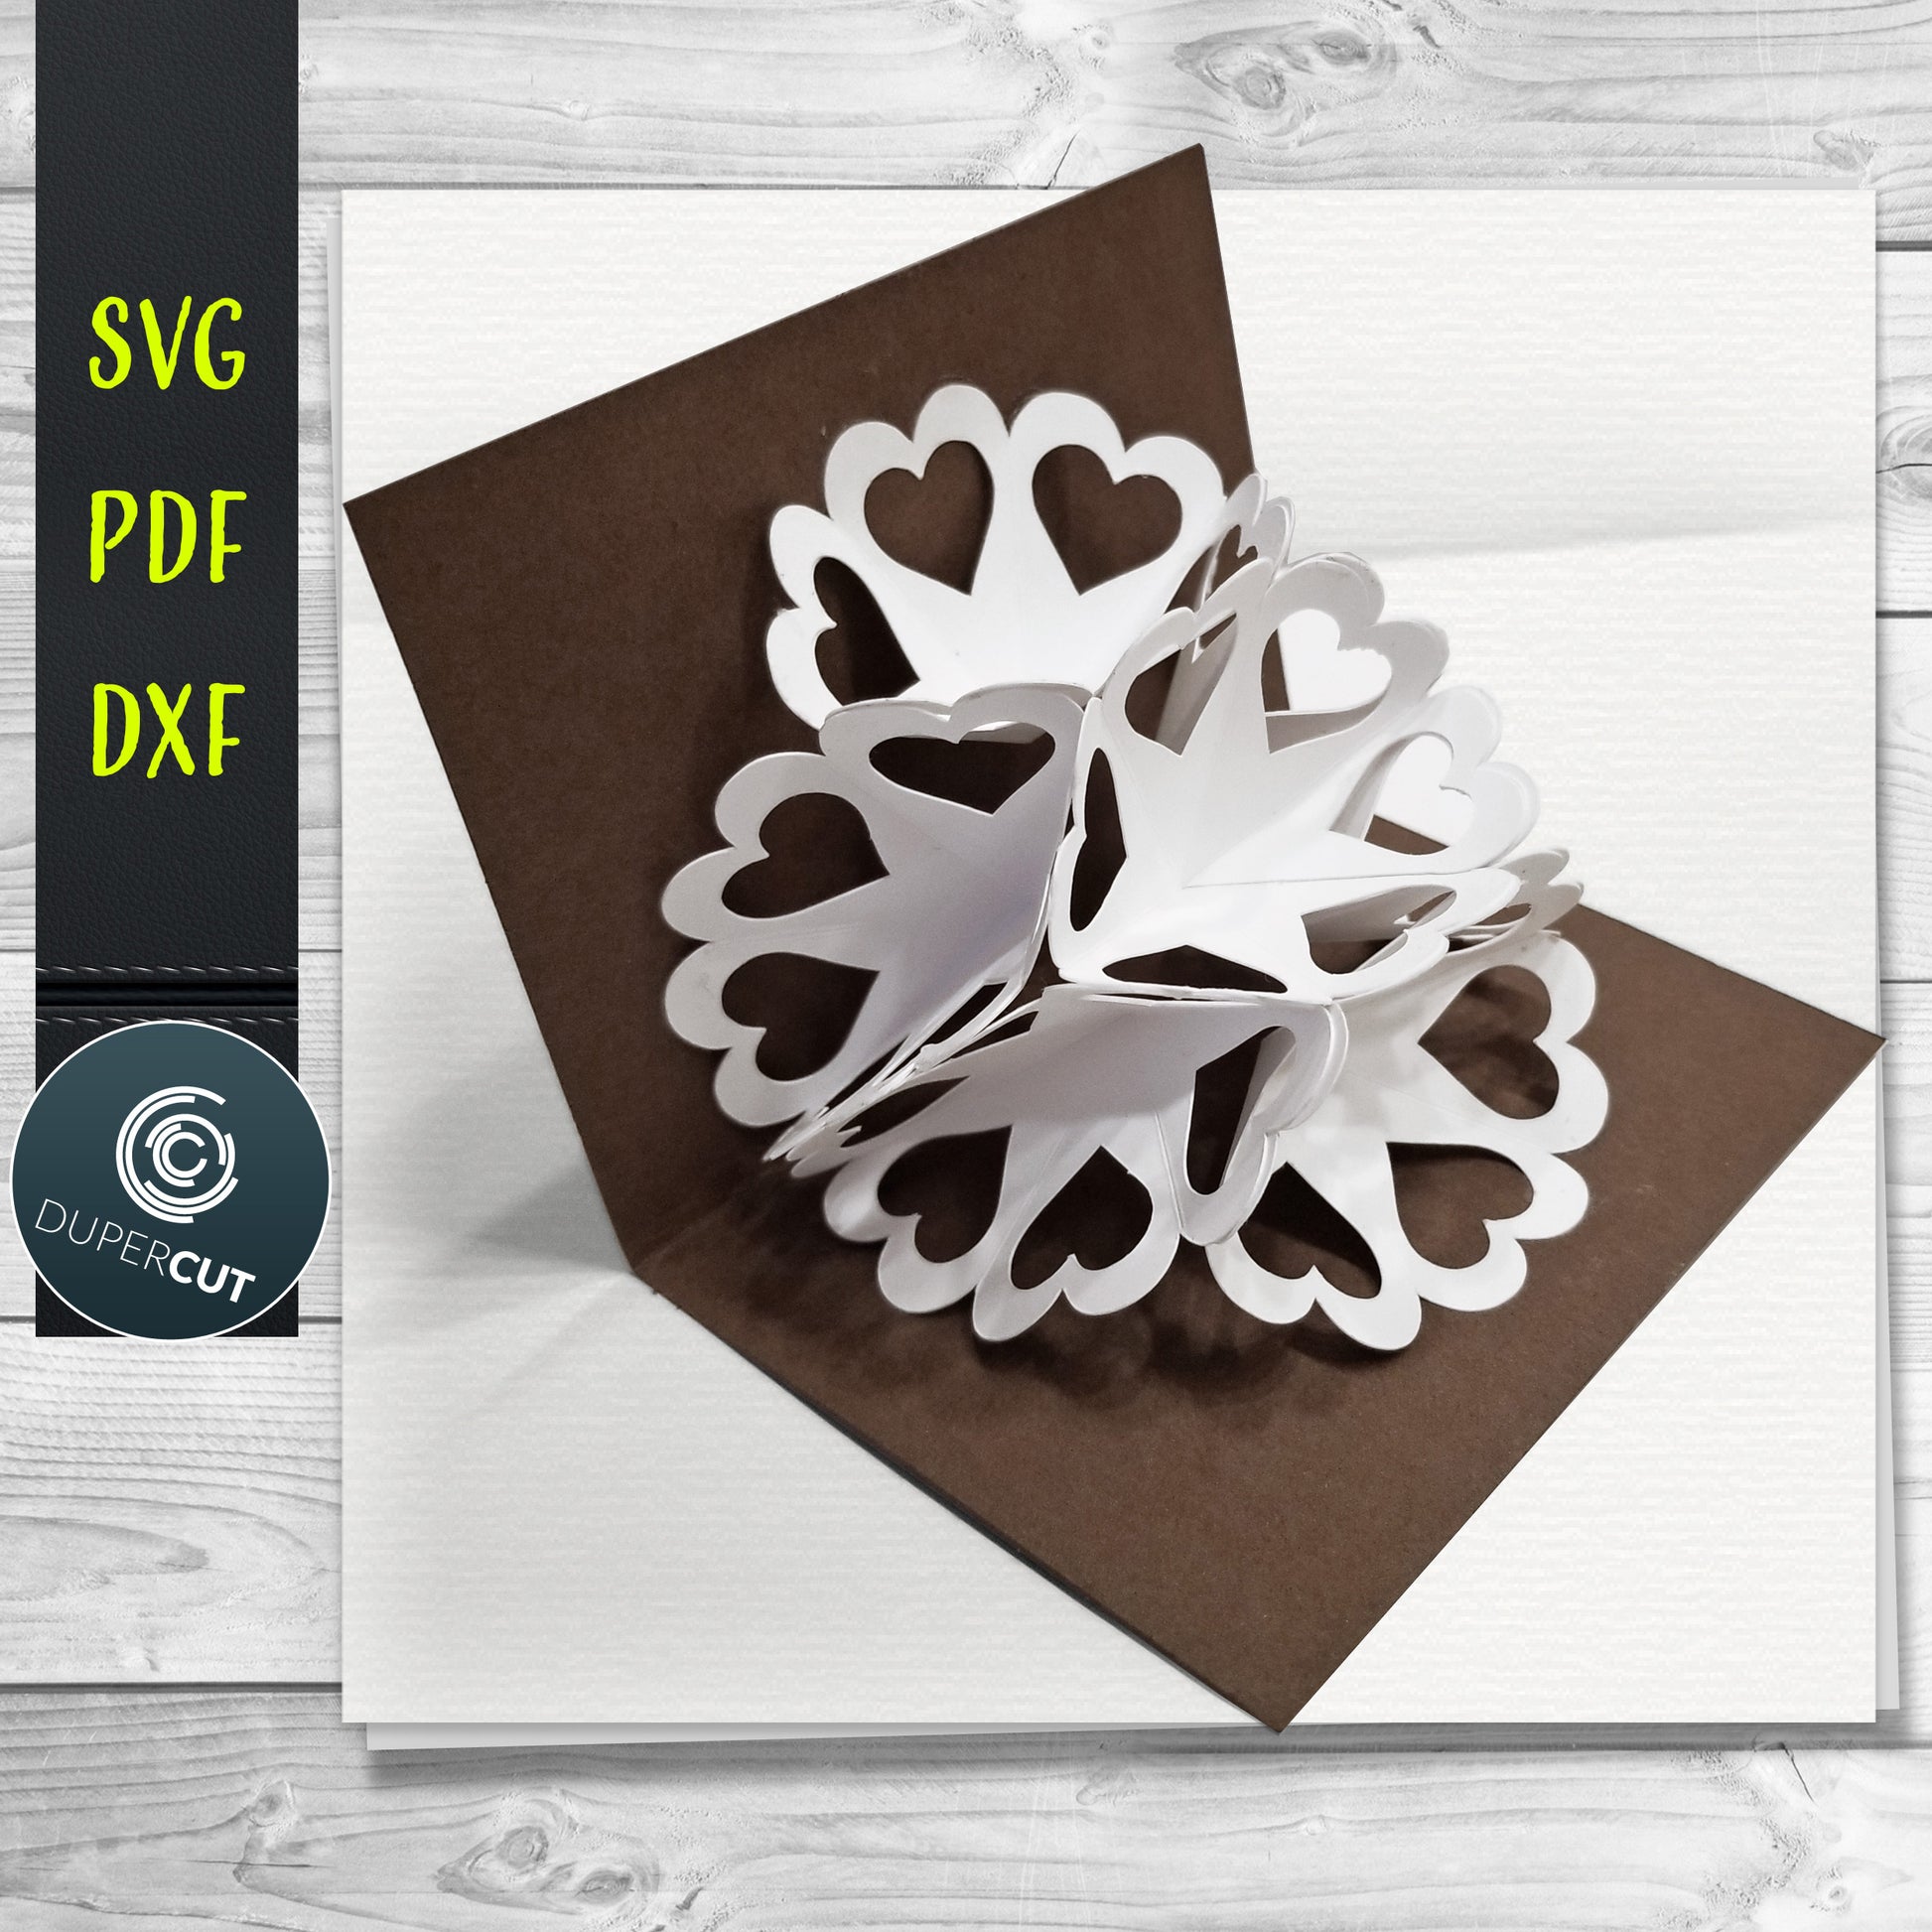 DIY flower pop-up card, Valentine's day gift, mother's day gift, diy birthday gift.  SVG DXF files with instructions.